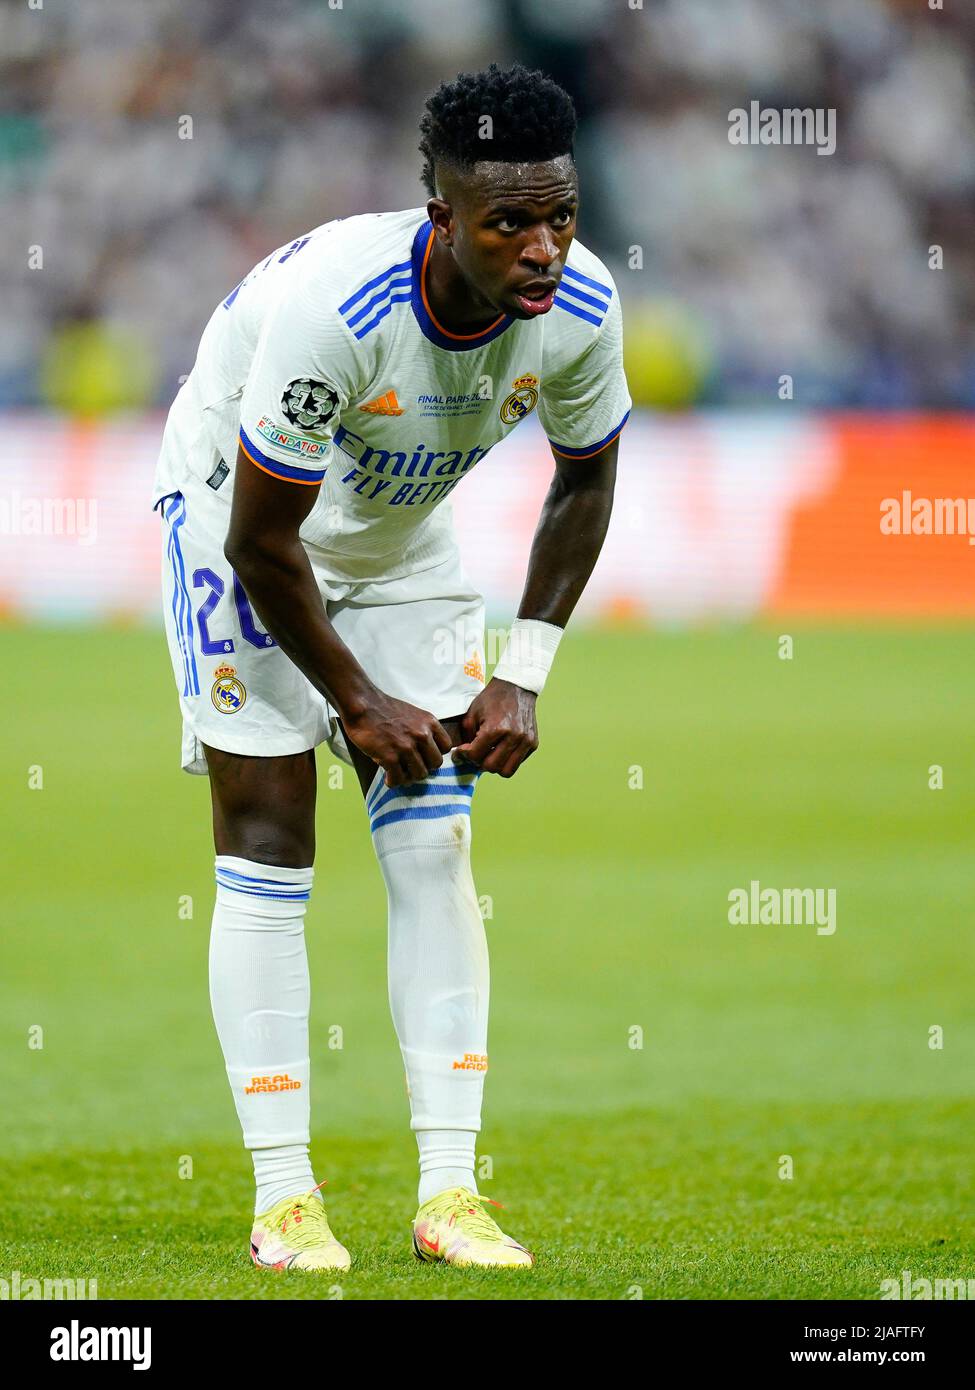 Vinicius Jr of Real Madrid during the UEFA Champions League Final match between Liverpool FC and Real Madrid played at Stade de France on May 28, 2022 in Paris, France. (Photo / Magma) Stock Photo